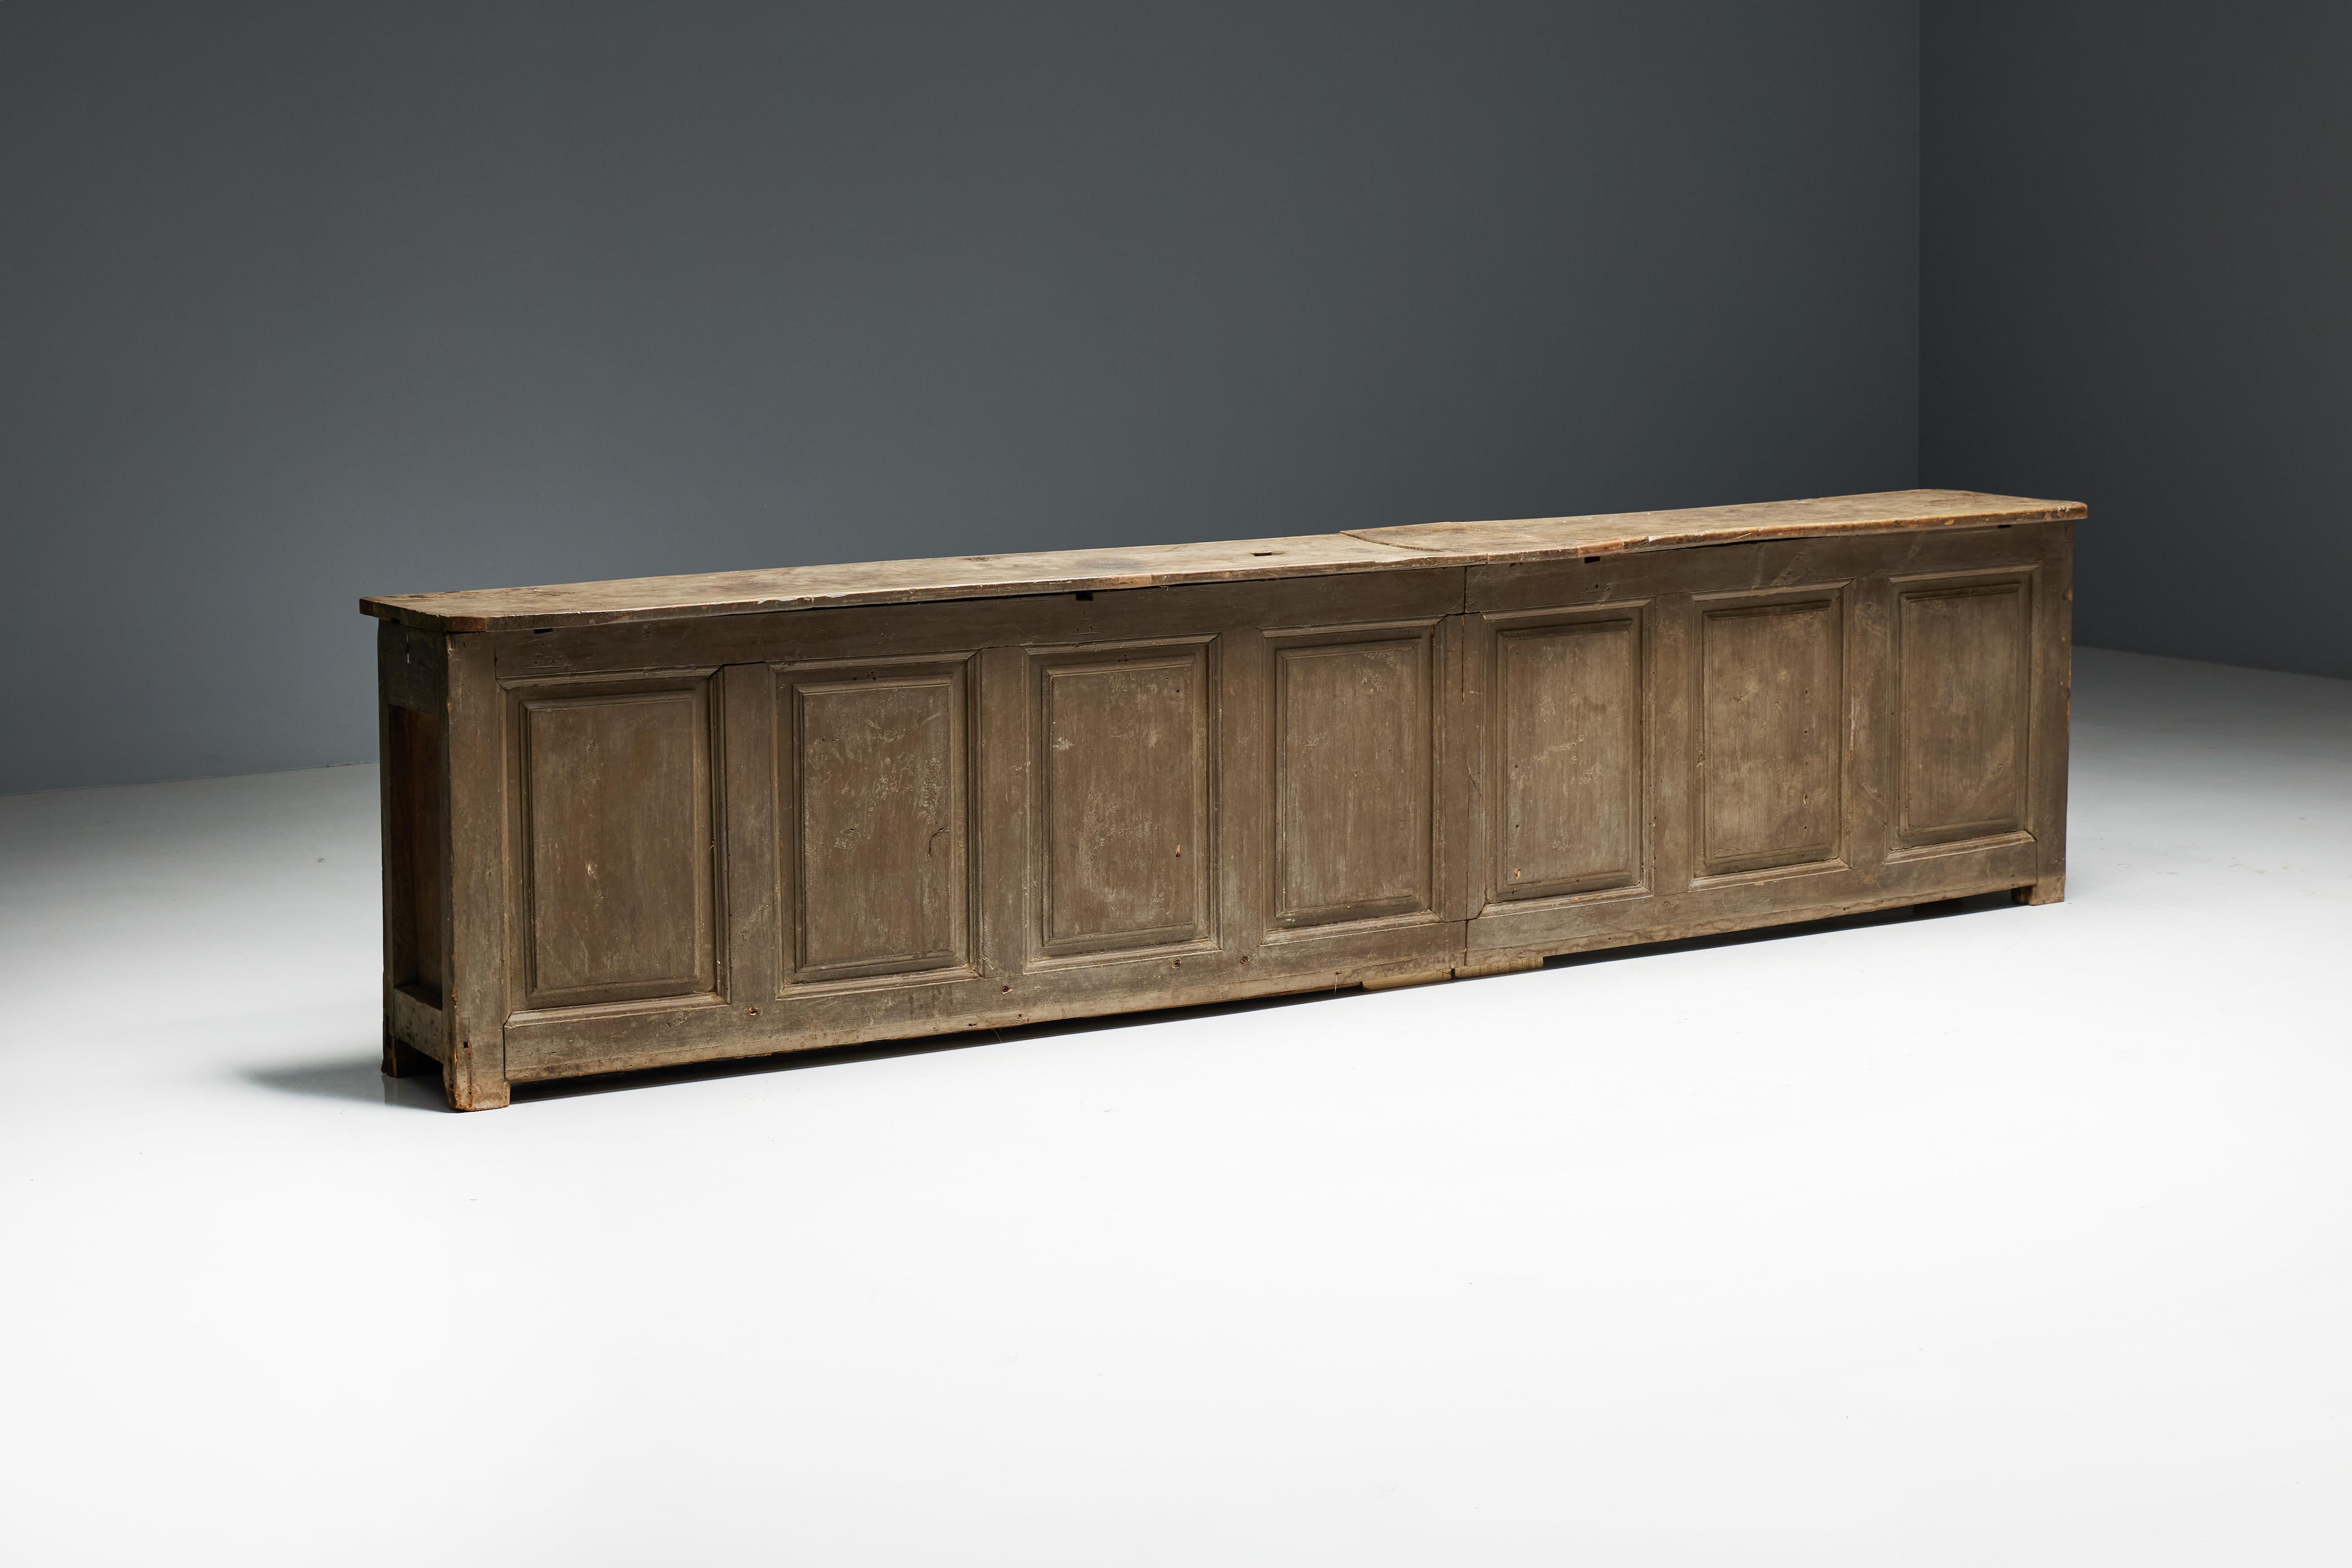 Rustic Art Populaire Freestanding Bar Counter, France, 19th Century For Sale 7